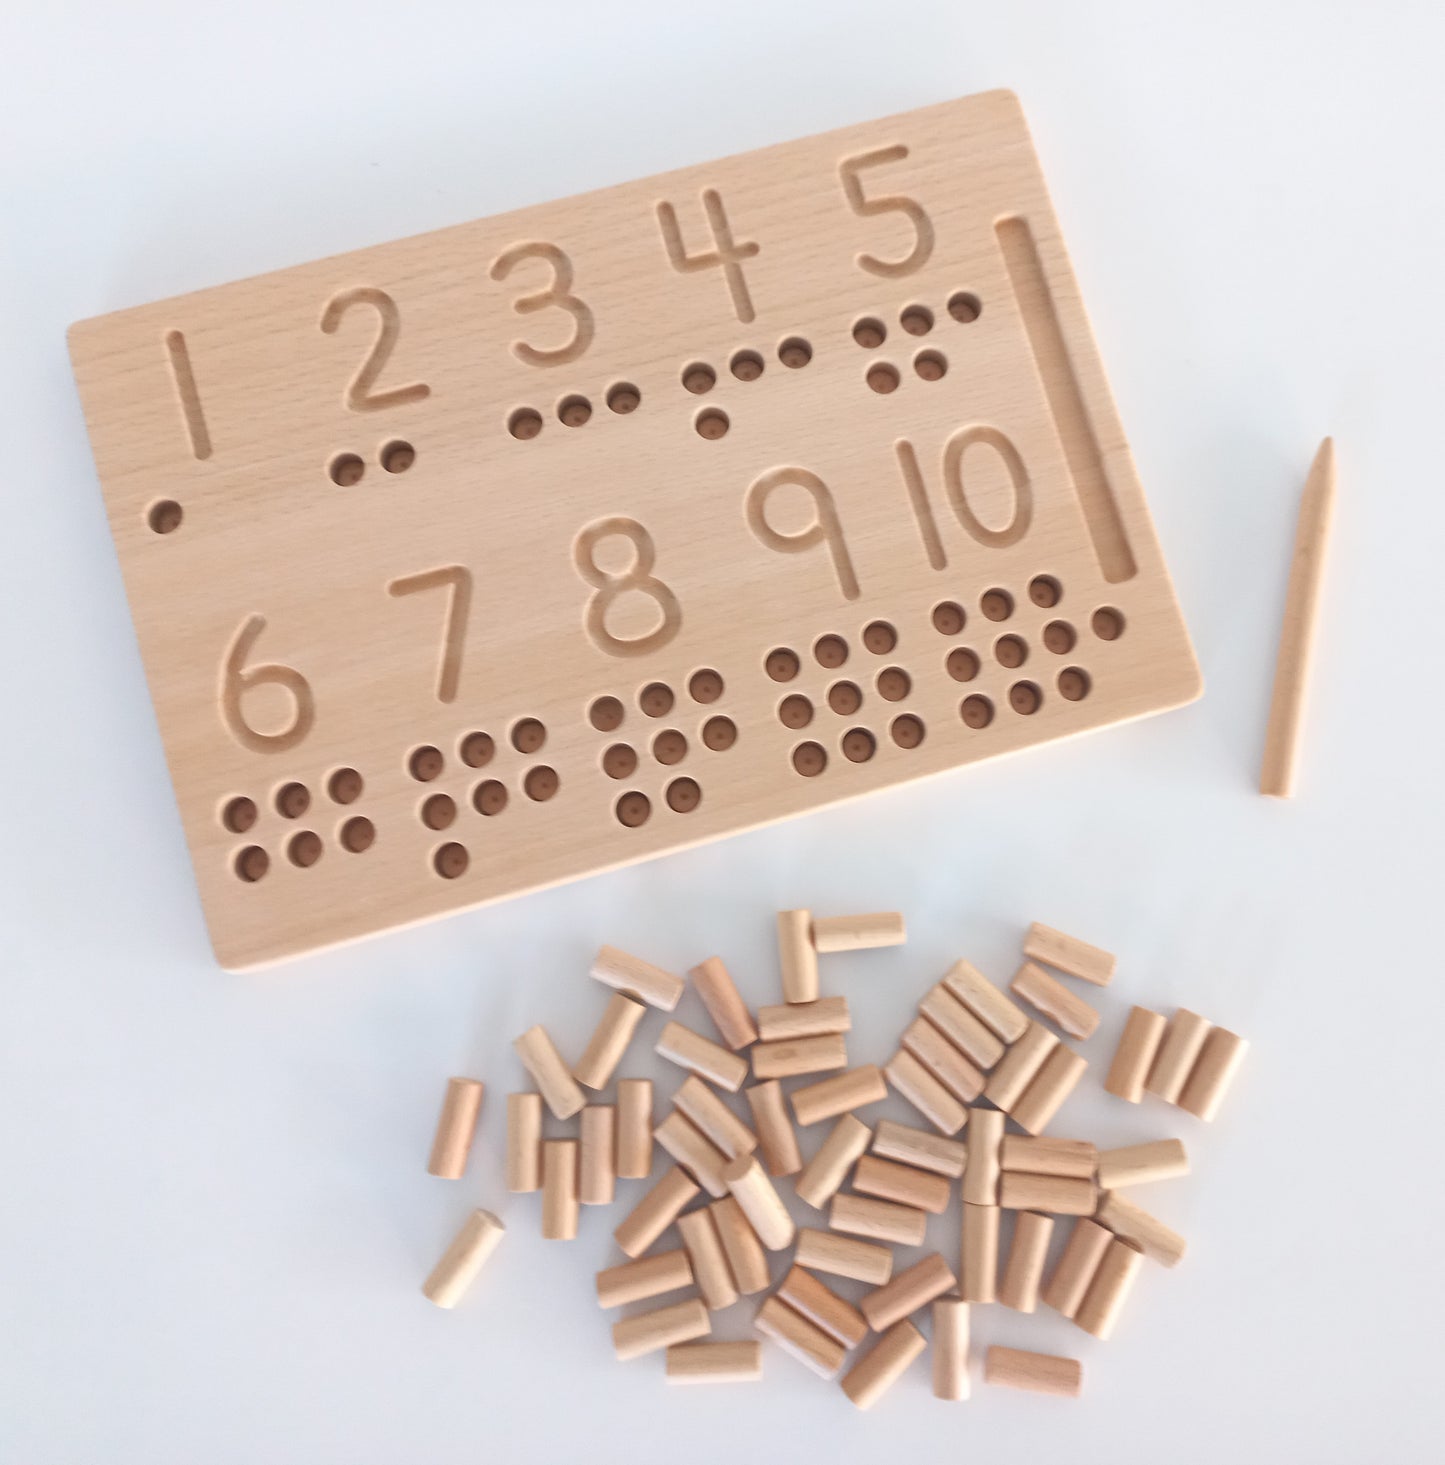 Number Tracing Board with Counters